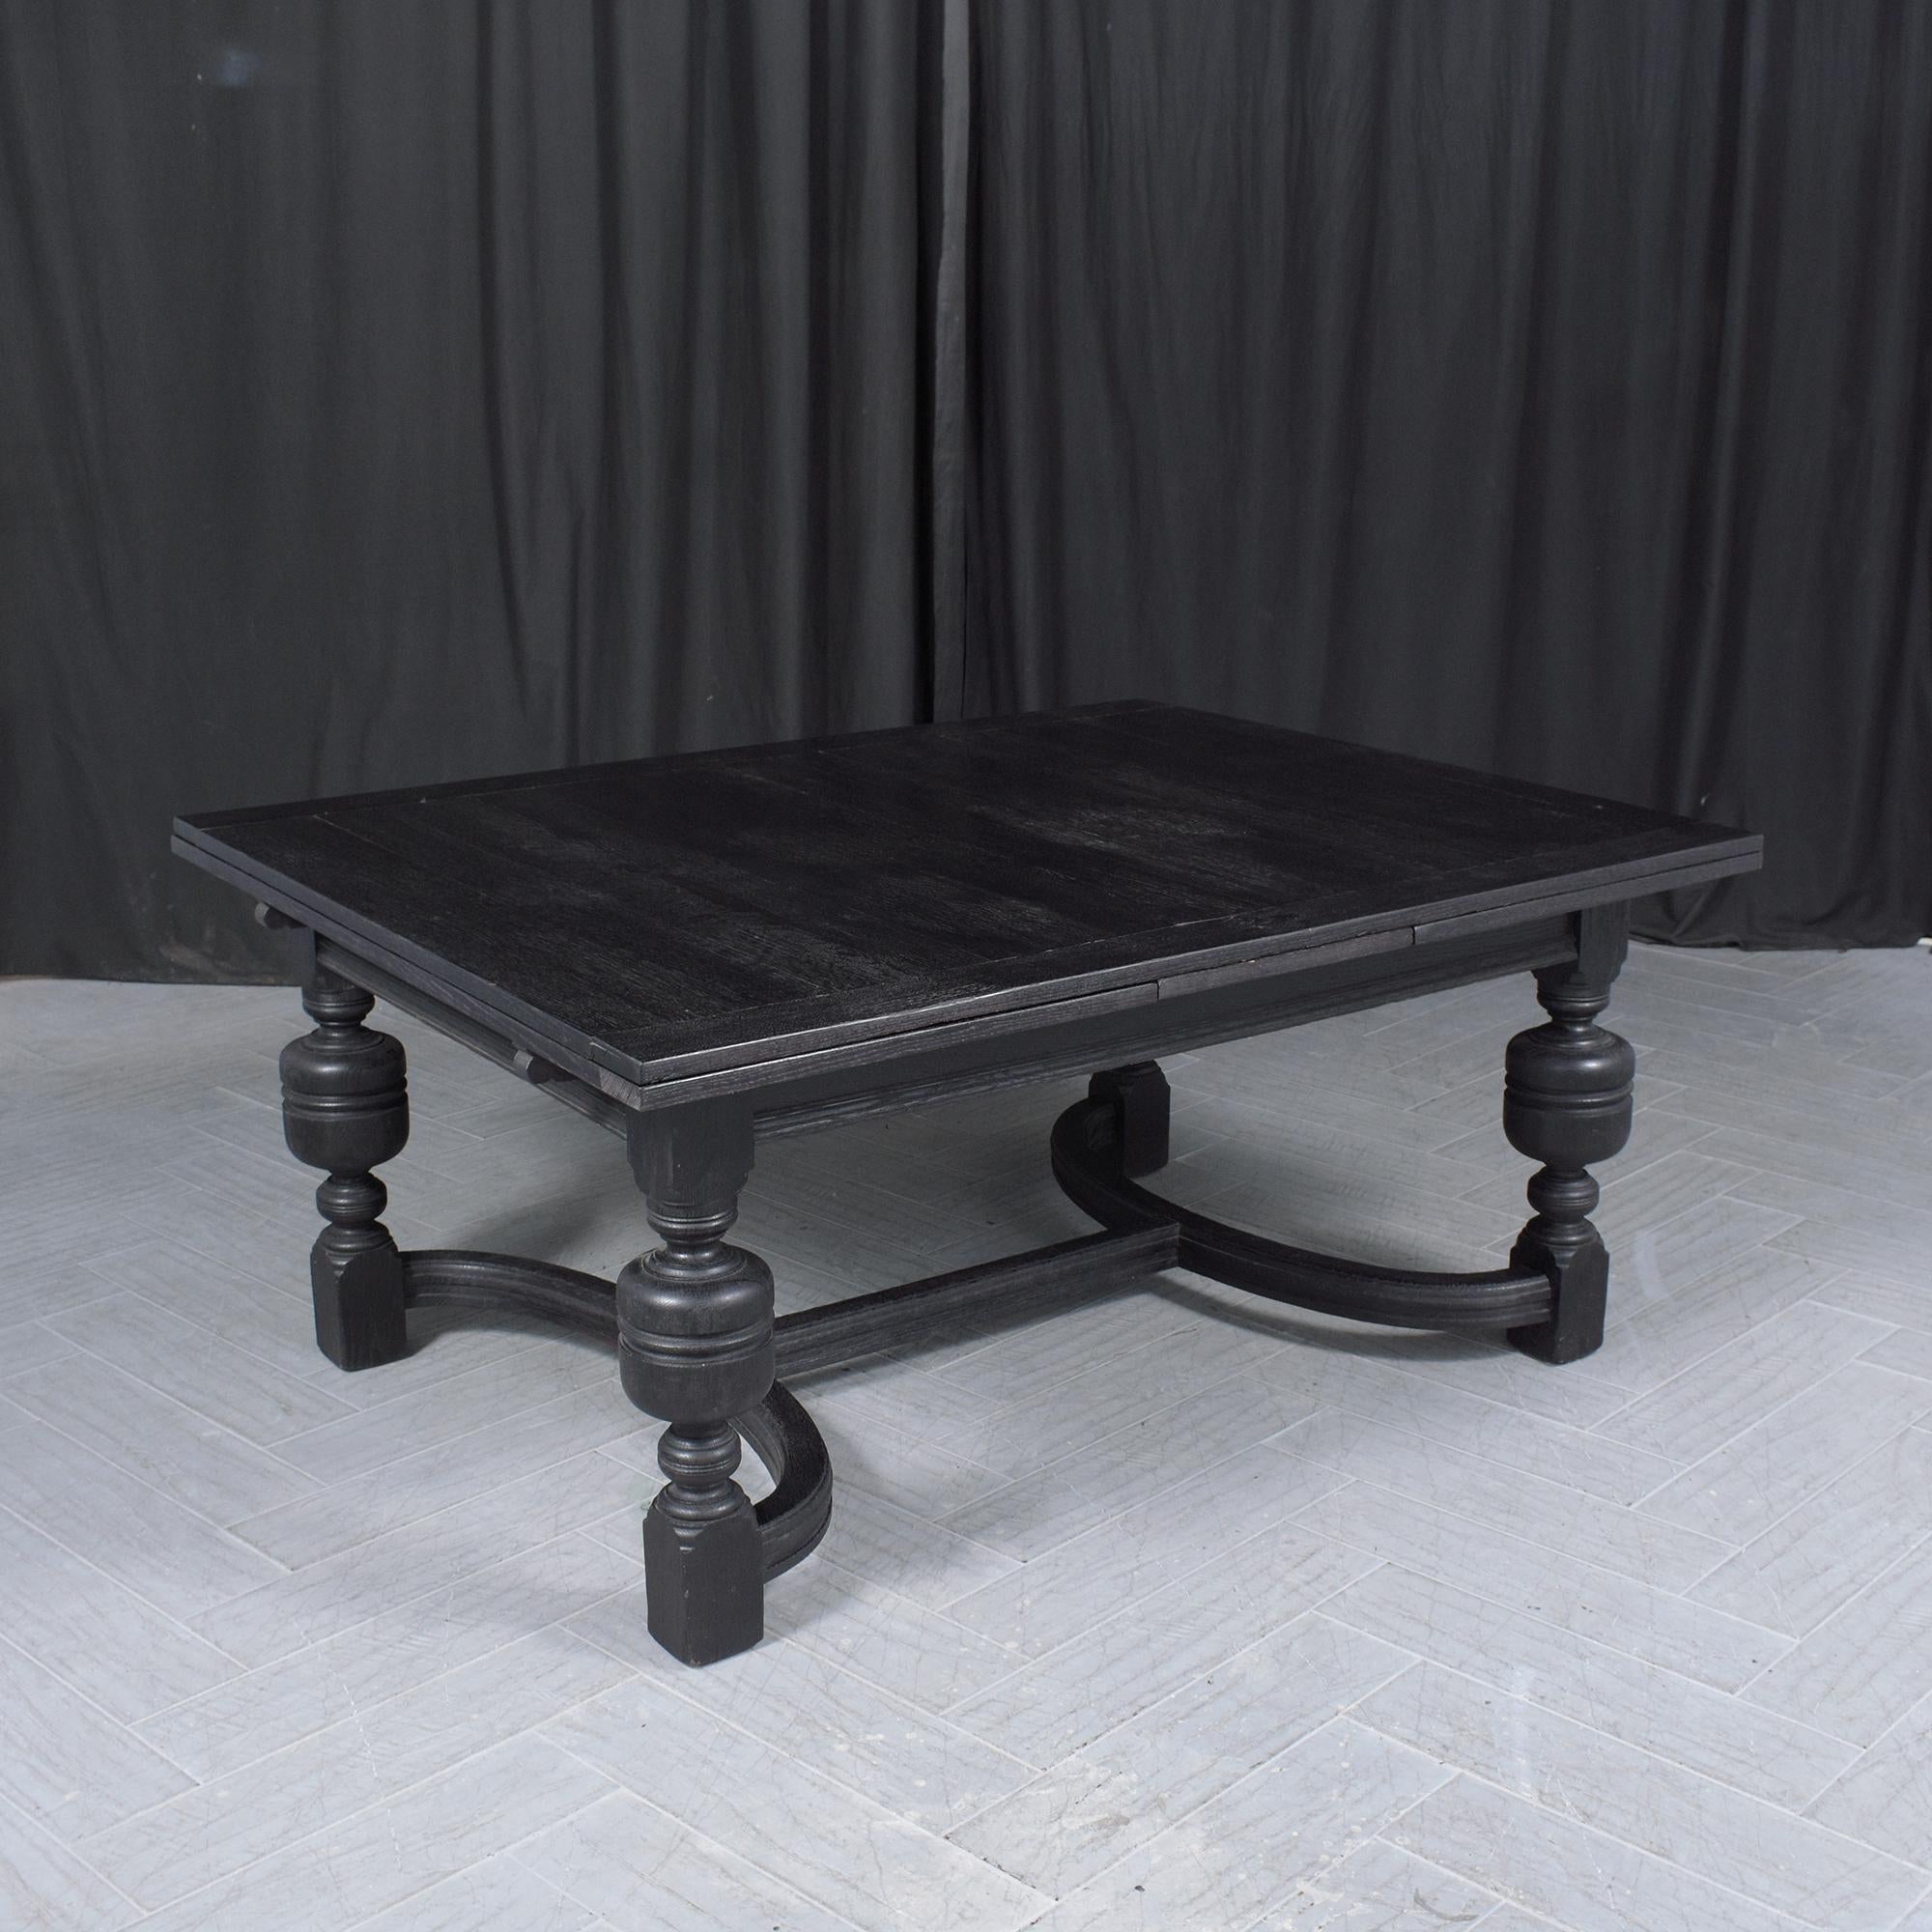 Lacquer 1850s Spanish Extendable Dining Table: Ebonized Solid Wood with French Design For Sale